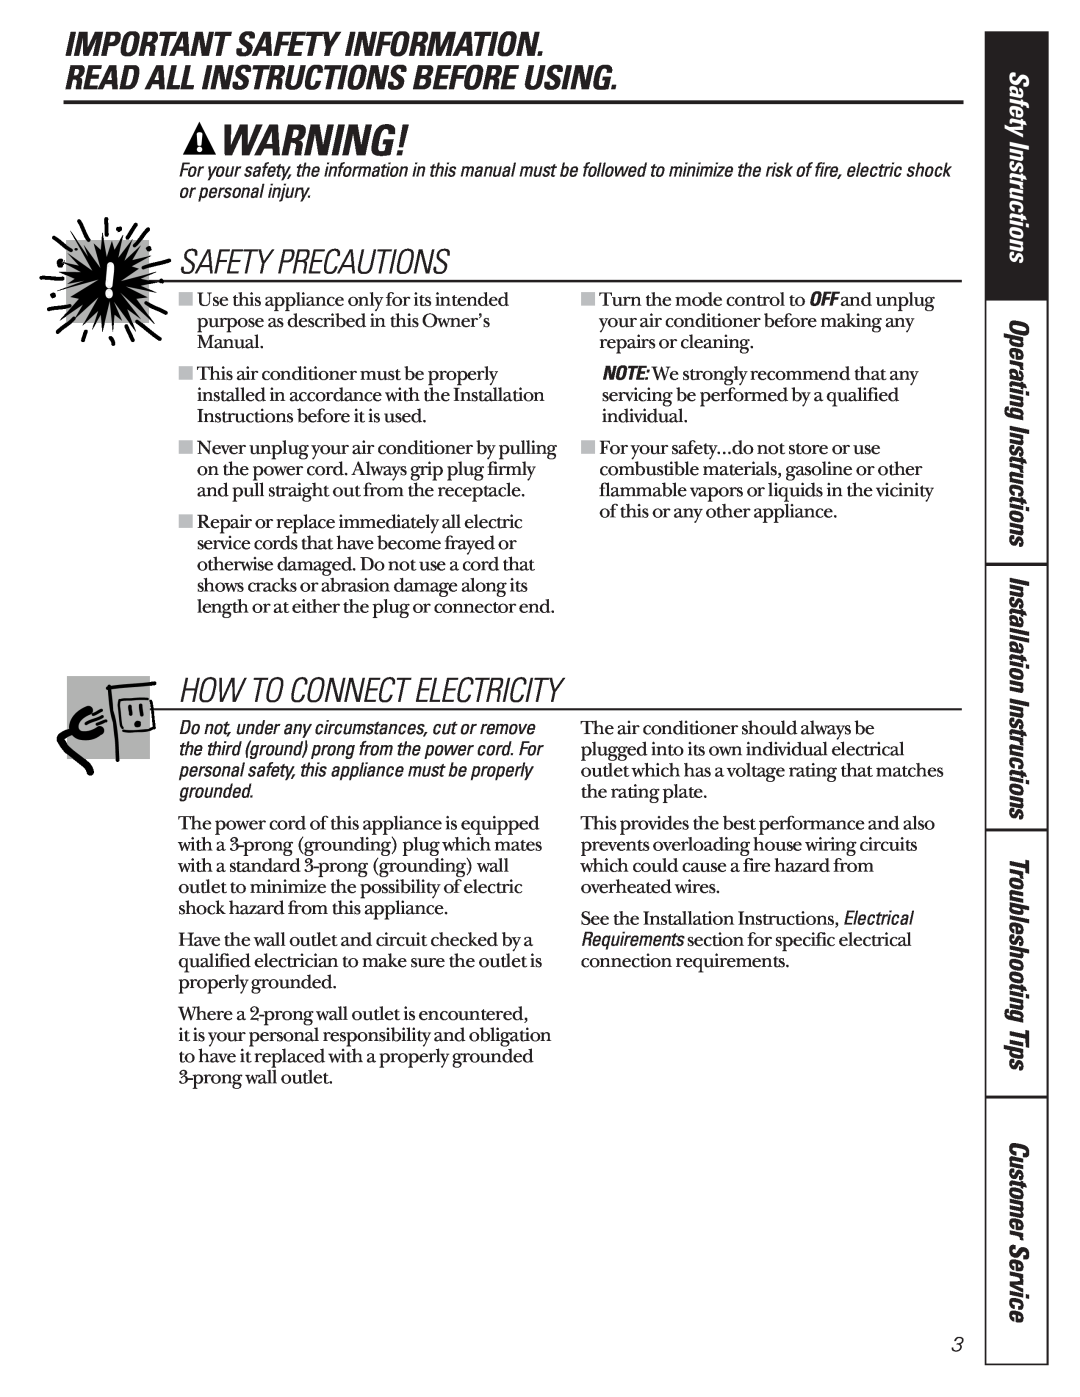 GE AG_14-14 Important Safety Information Read All Instructions Before Using, Safety Precautions, Safety Instructions 